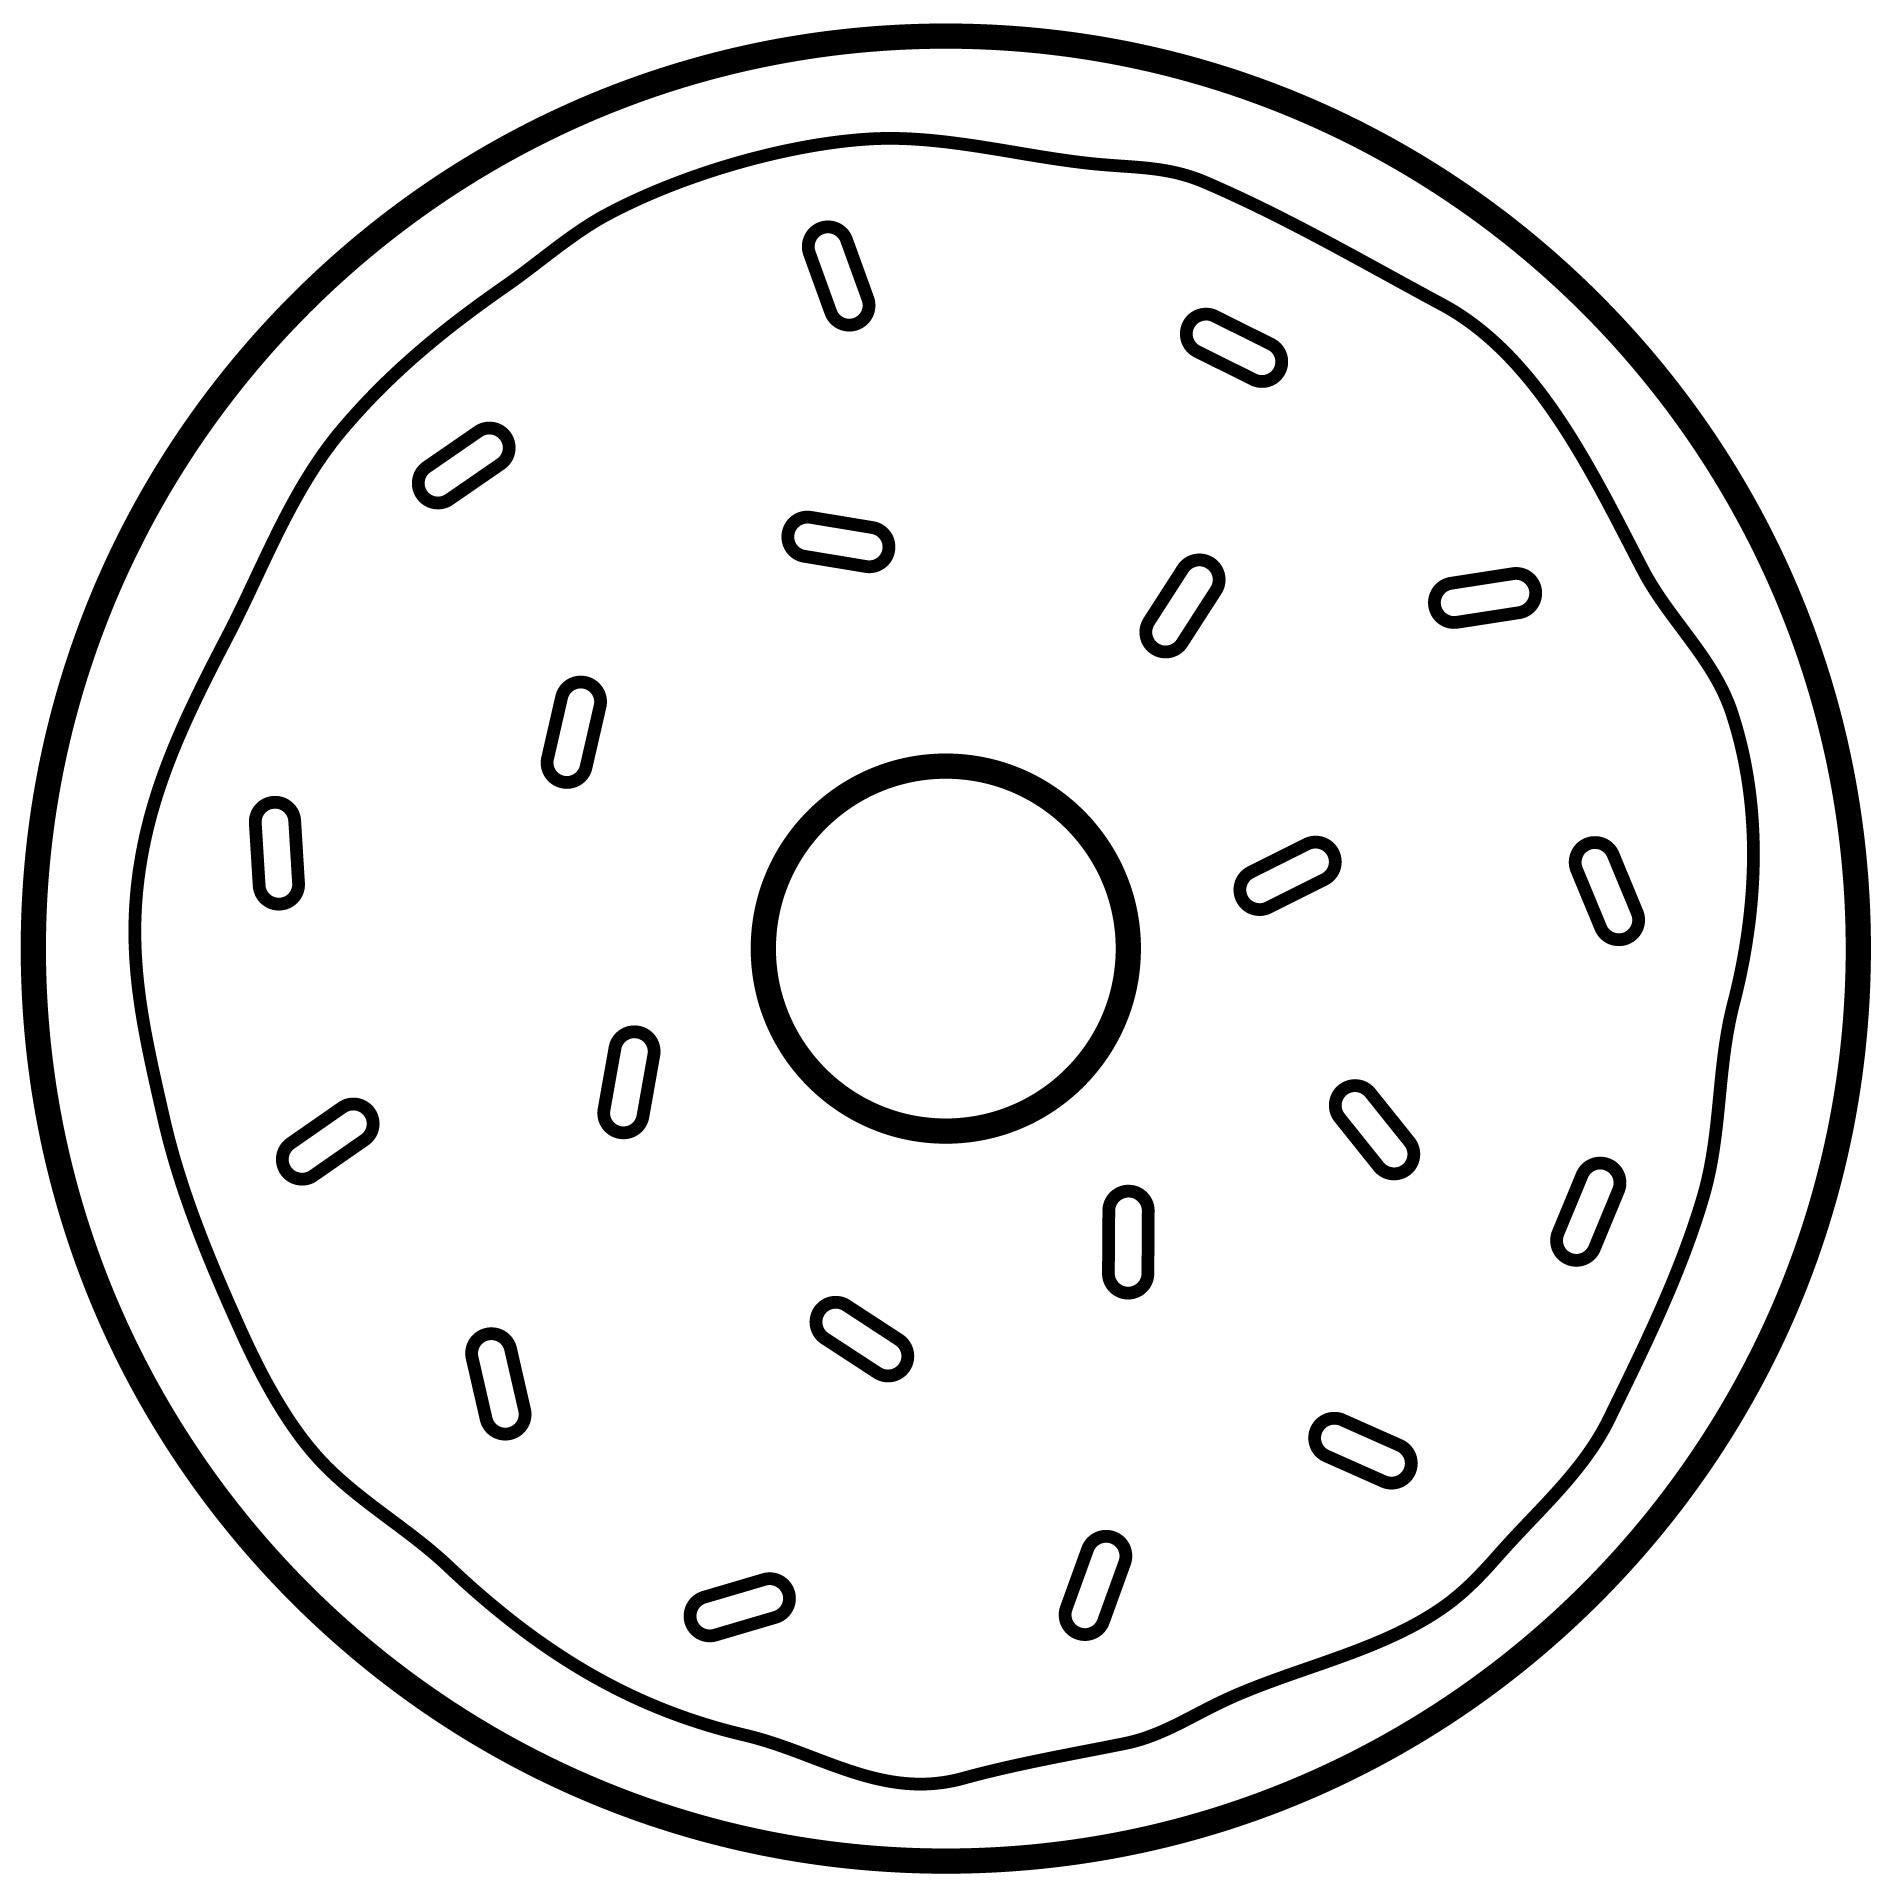 Donut donut coloring page coloring pages coloring pages for kids